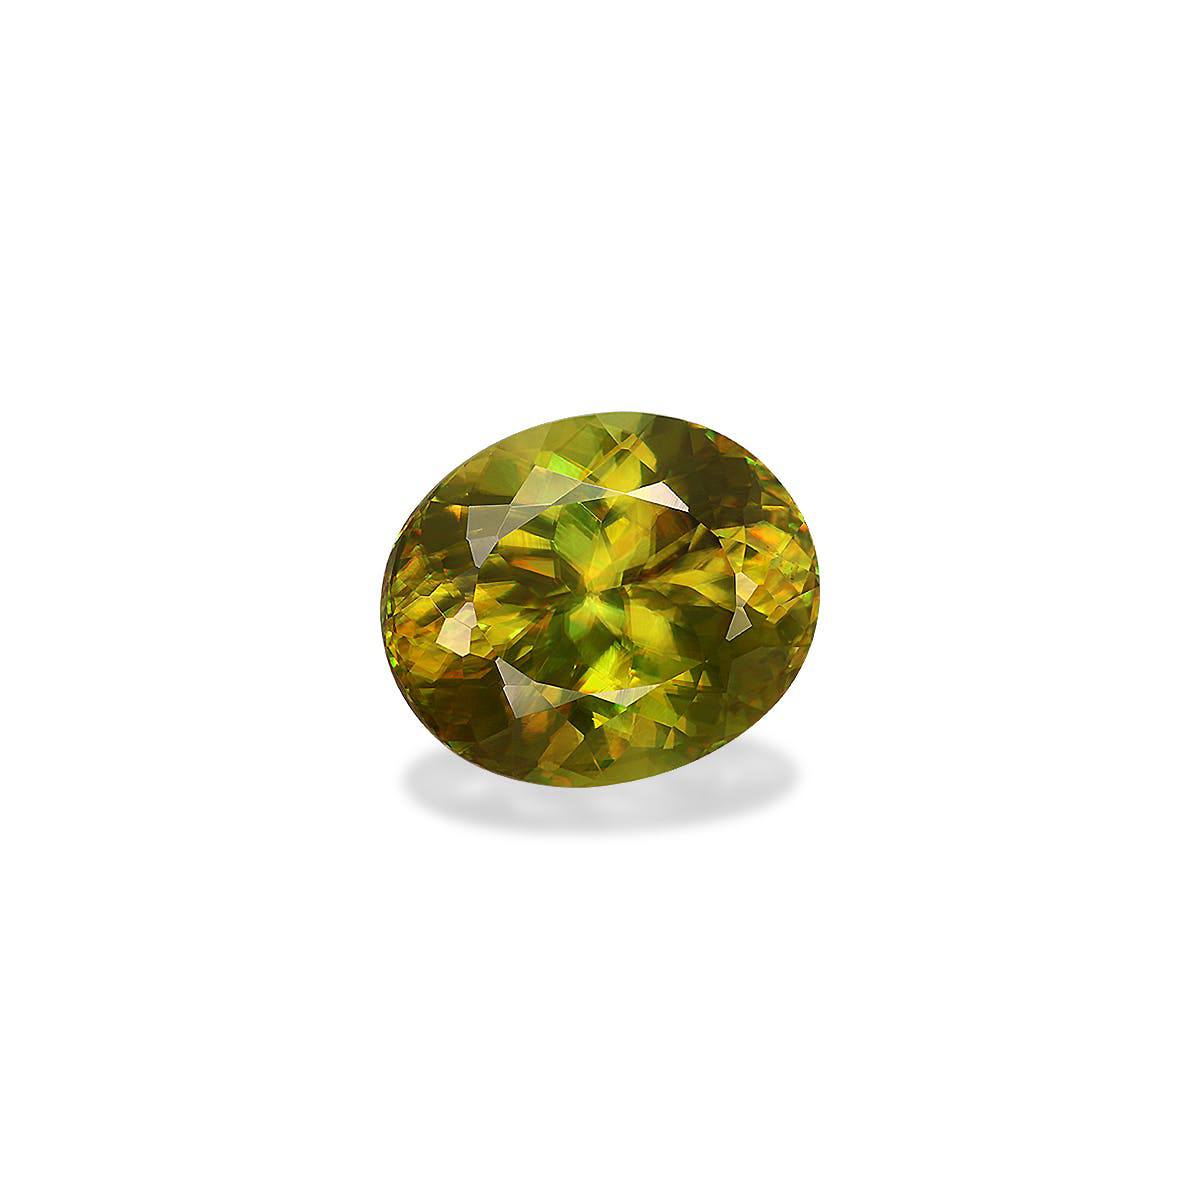 Picture of Lime Green Sphene 5.53ct - 12x10mm (SH1099)